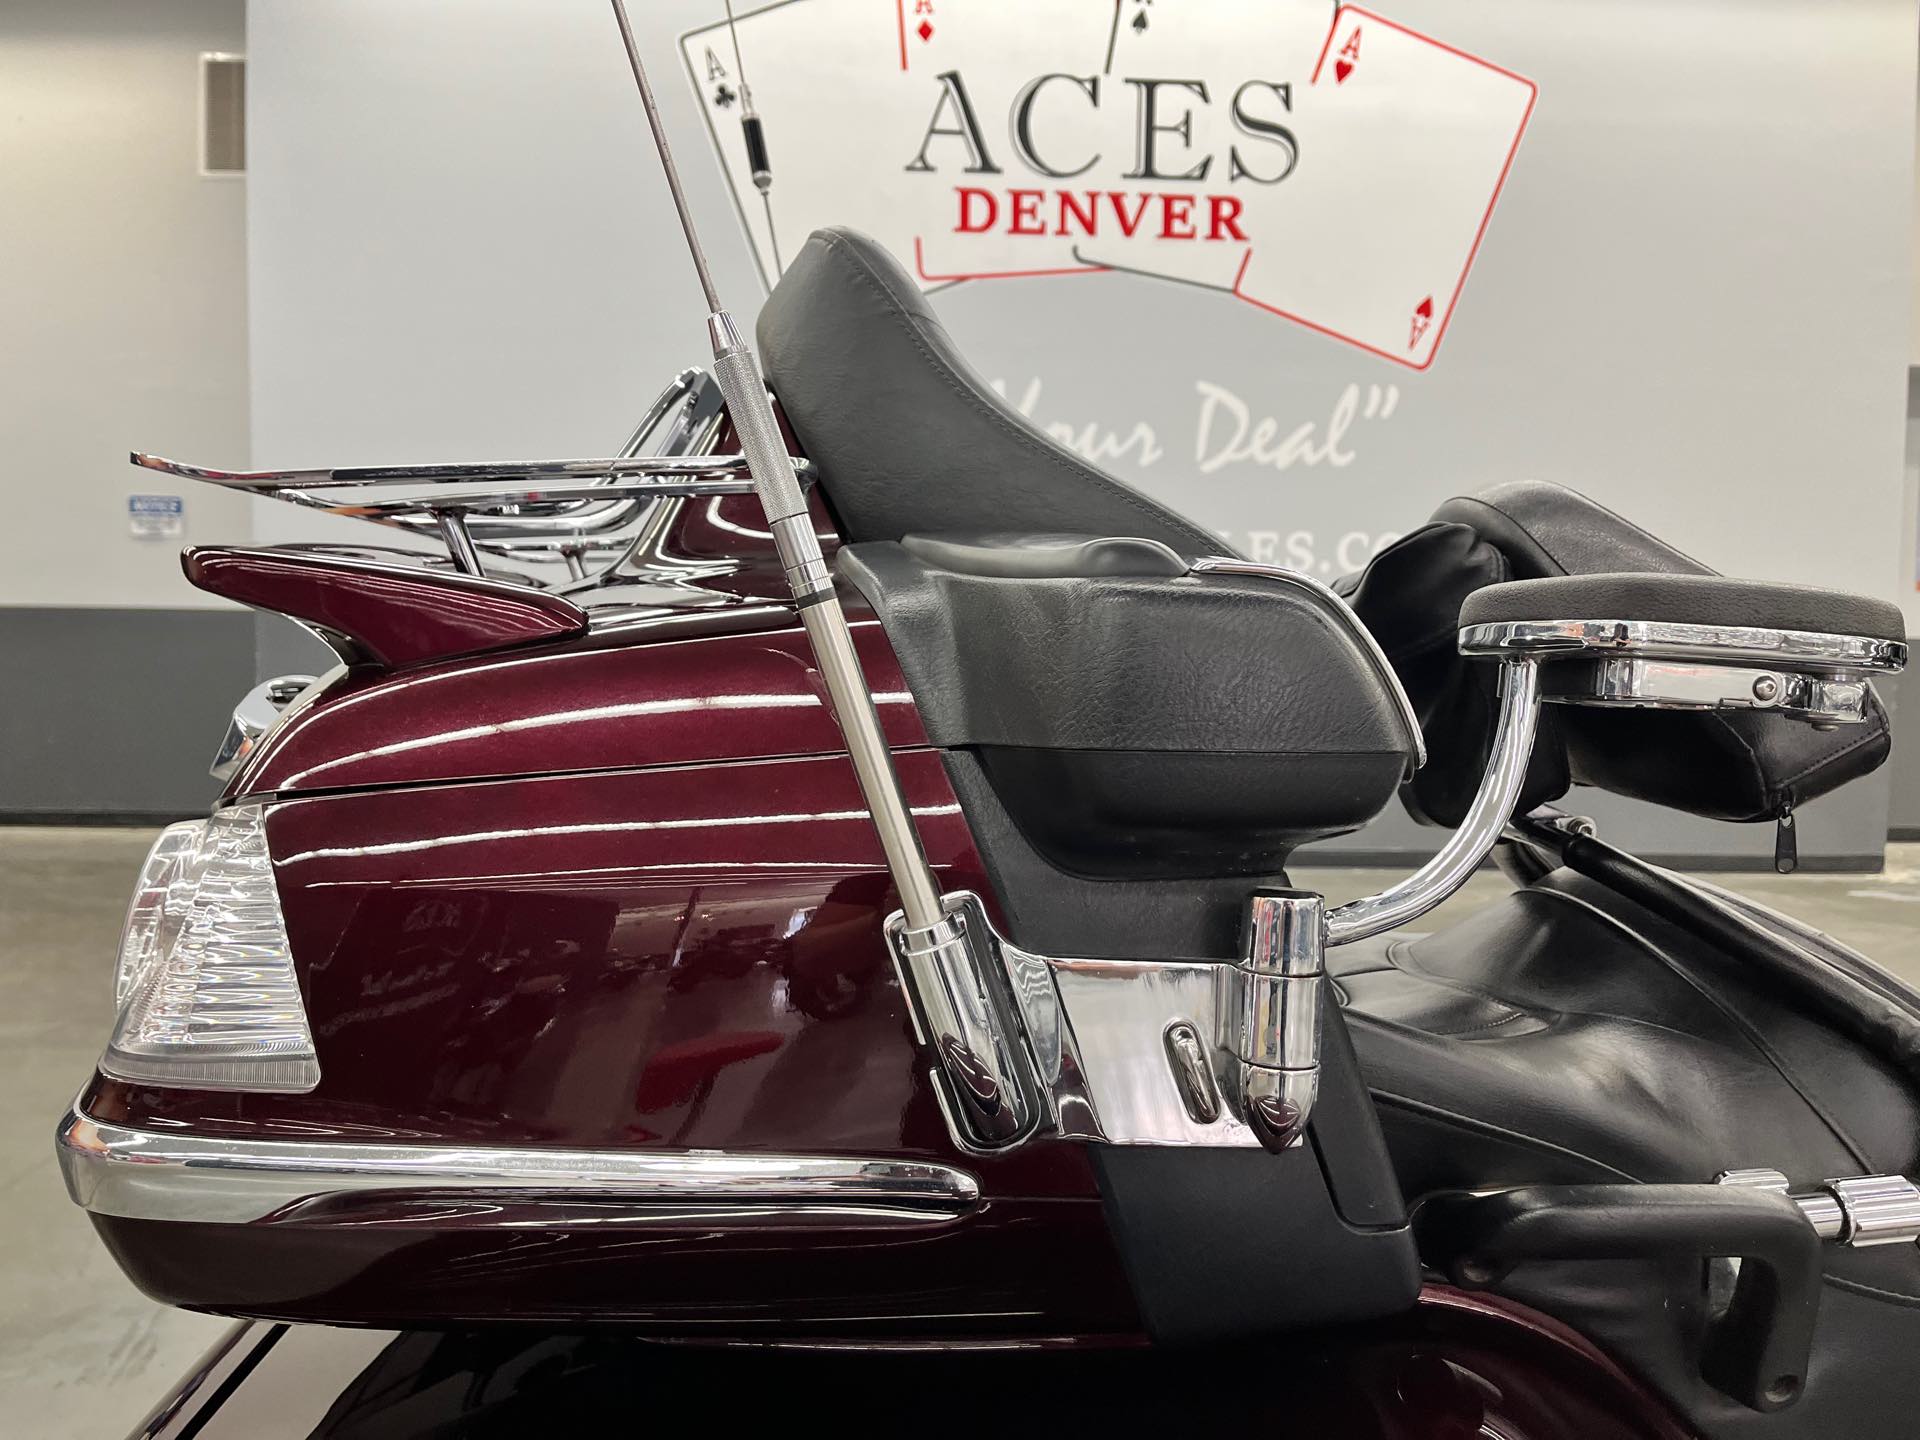 2006 Honda Gold Wing Audio / Comfort at Aces Motorcycles - Denver